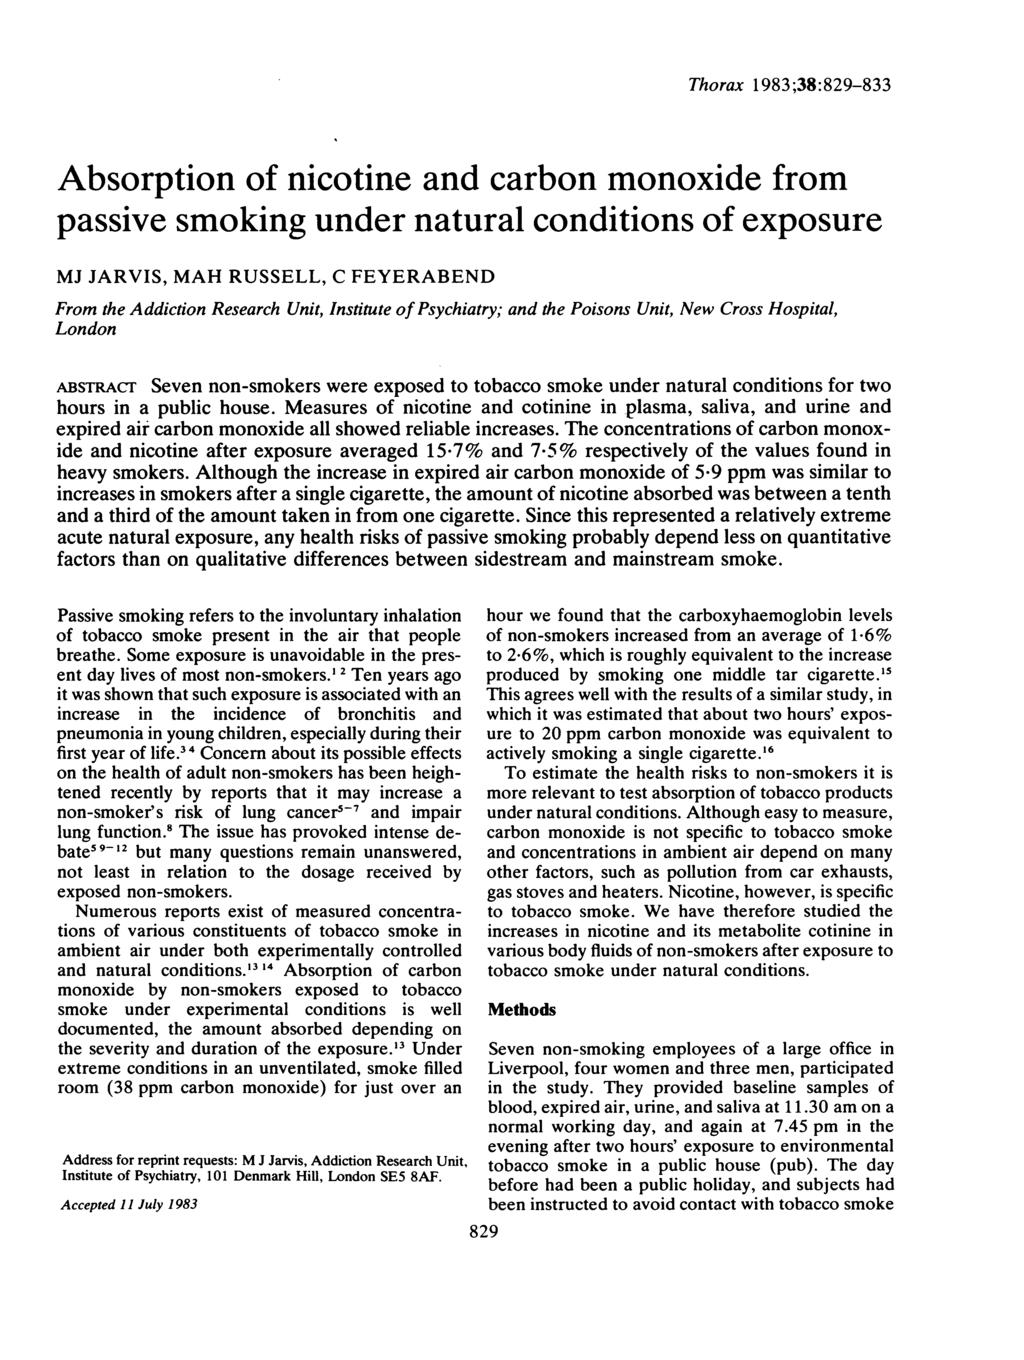 Thorax 1983;38:89-833 Absorption of nicotine and carbon monoxide from passive smoking under natural conditions of exposure MJ JARVIS, MAH RUSSELL, C FEYERABEND From the Addiction Research Unit,